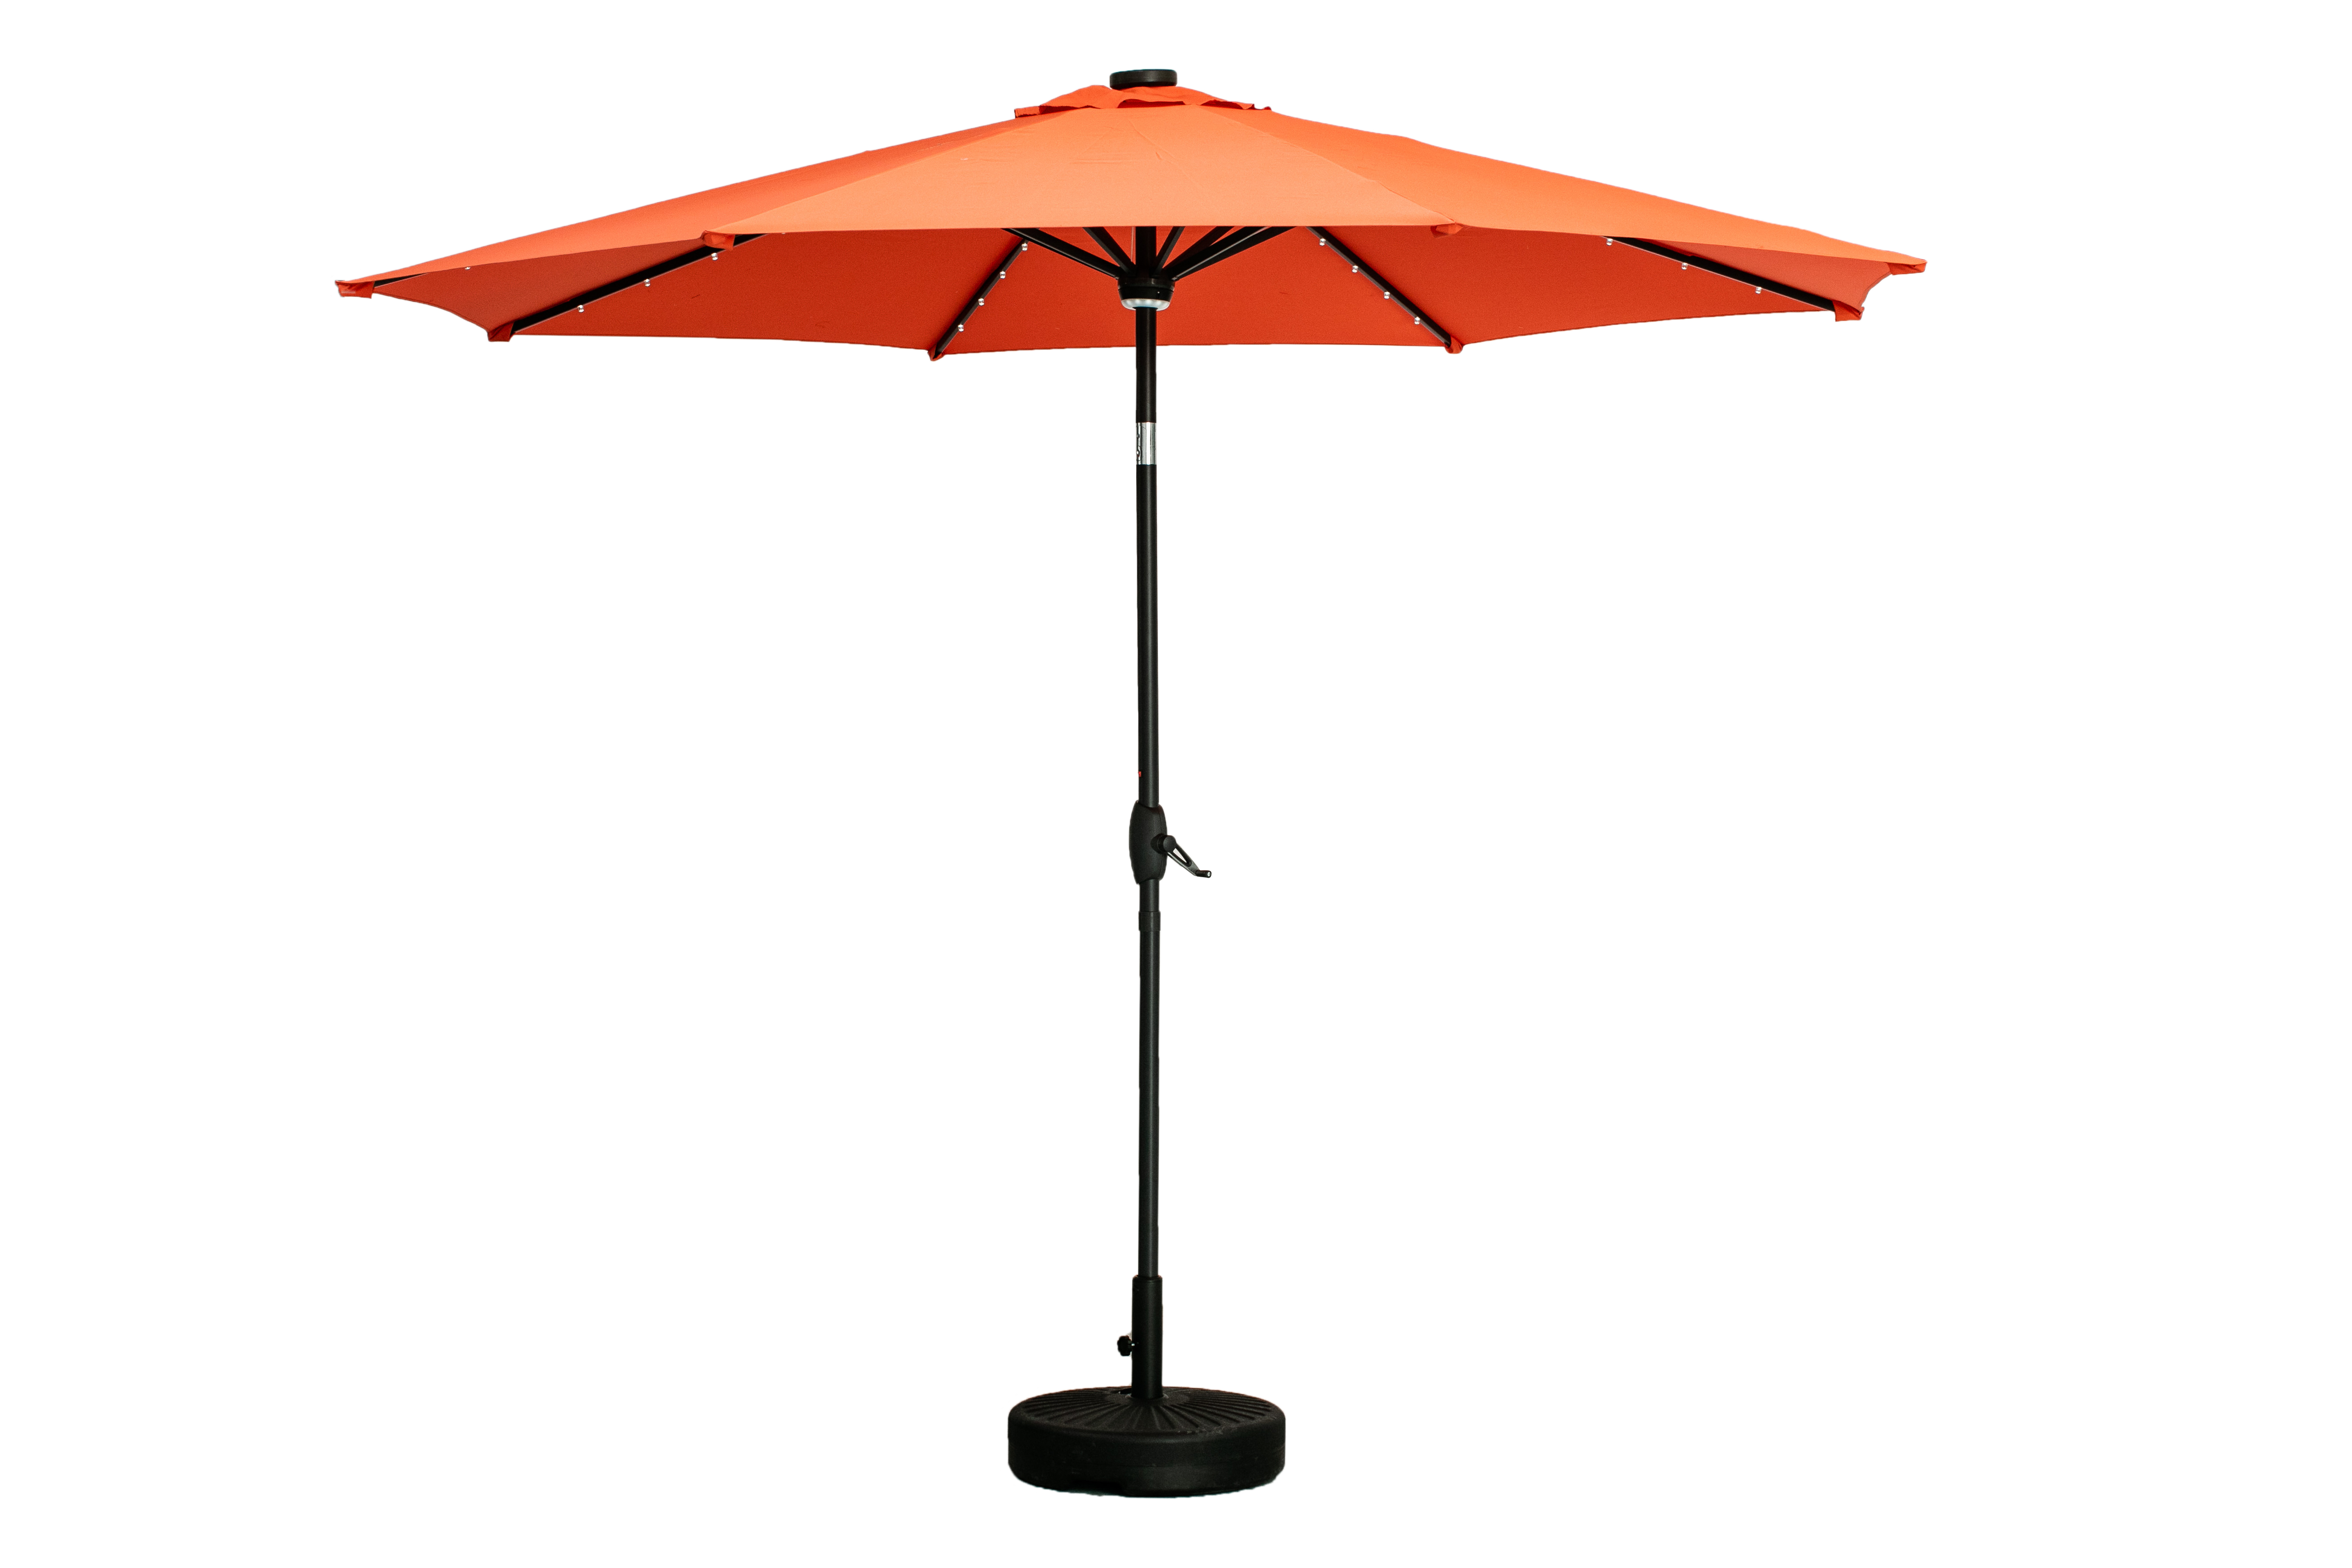 10ft Patio Umbrella (Orange) with 40 led lights for $50 + Free Shipping